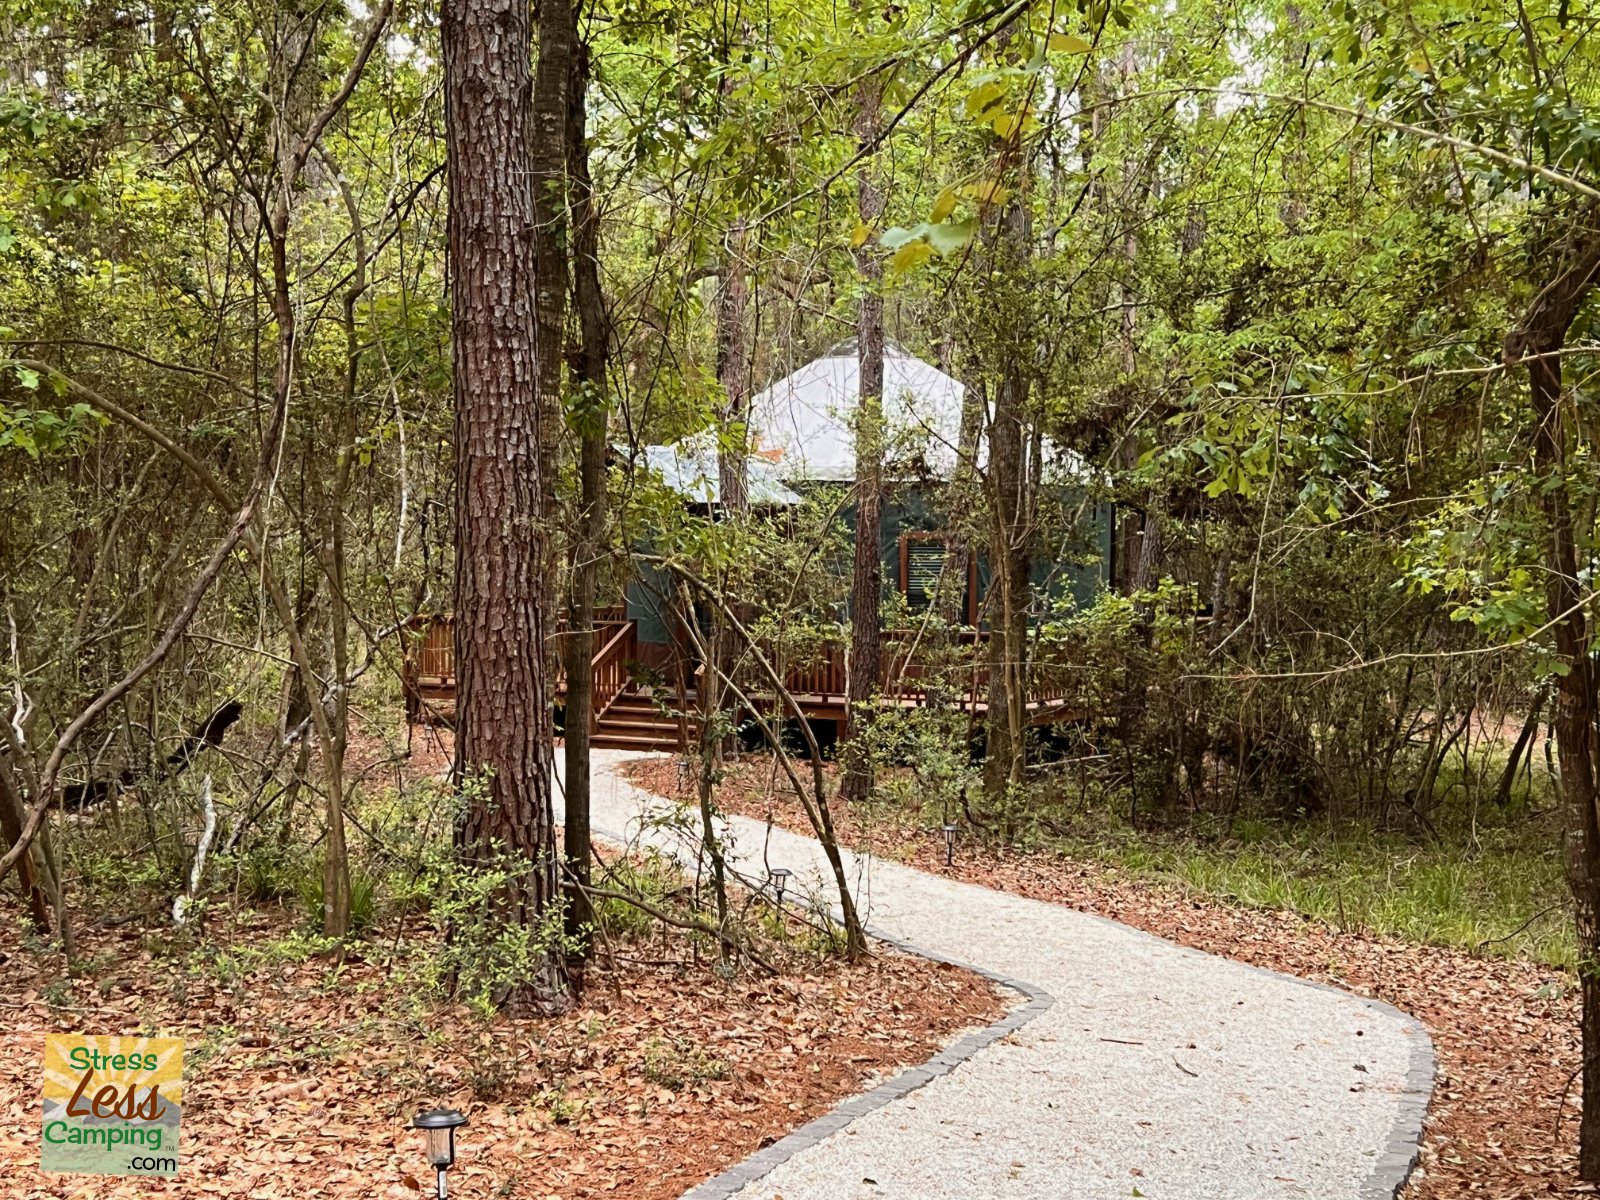 One of the yurts in the forest at Two Creeks Crossing Resort in Livingston Texas.jpg